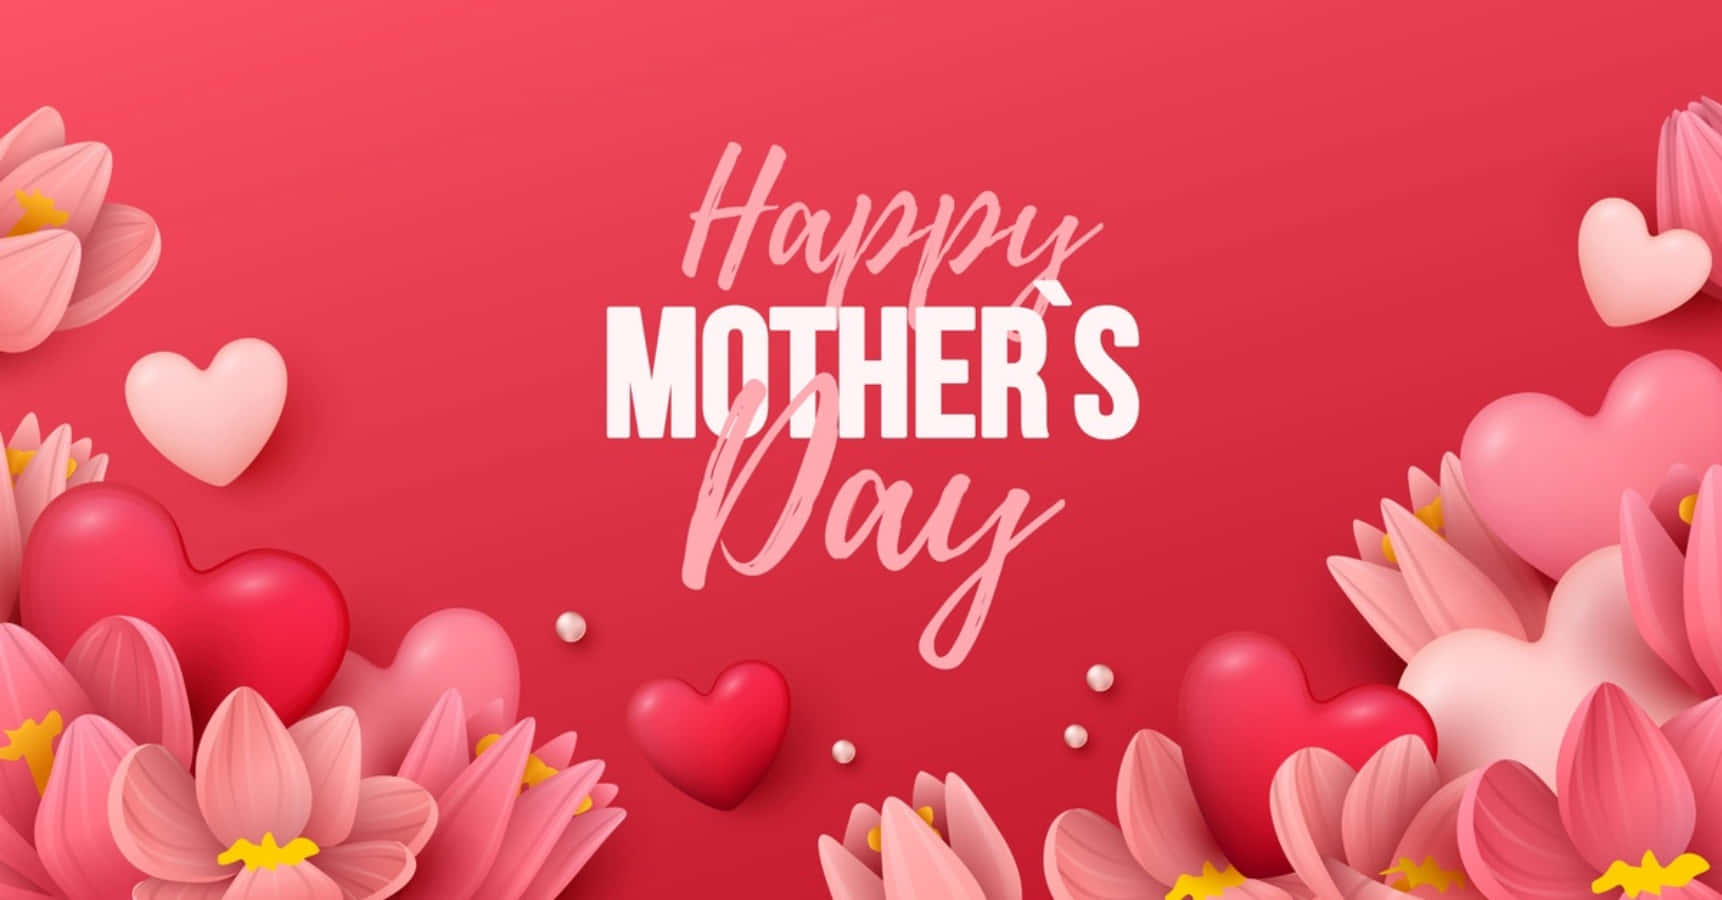 Happy Mother's Day Background With Pink Flowers And Hearts